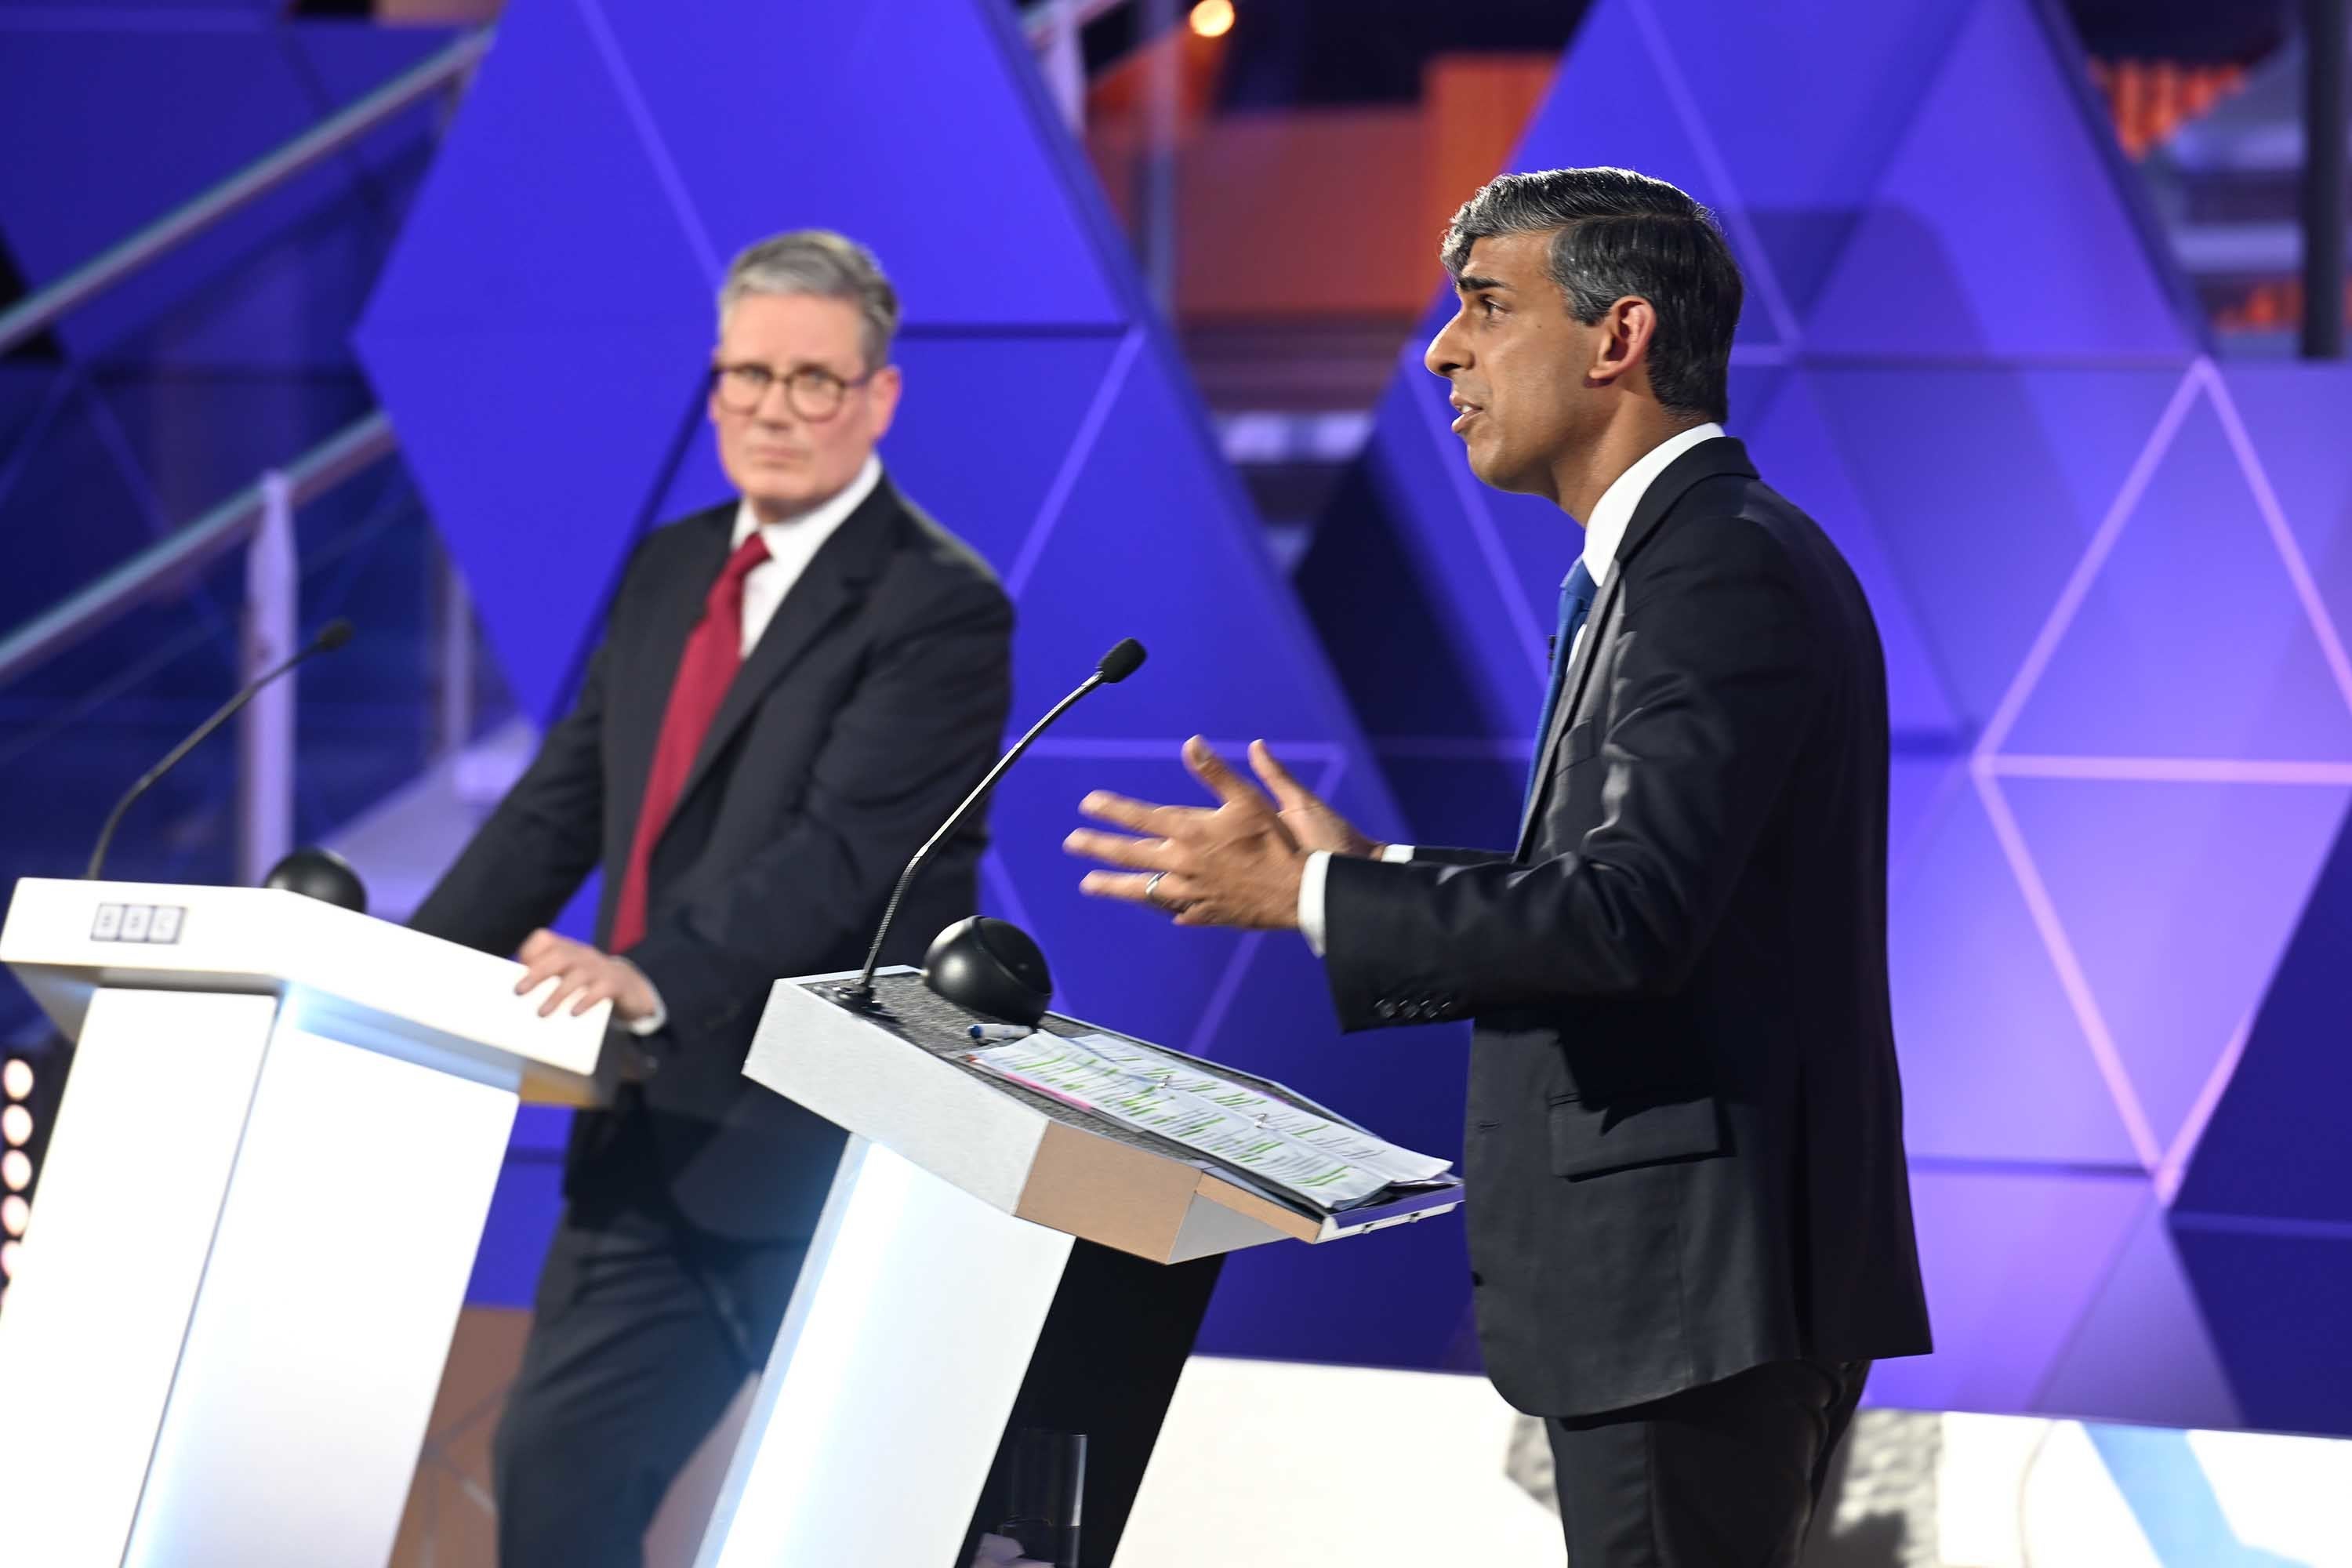 Prime minister Rishi Sunak and Labour leader Sir Keir Starmer during their BBC head-to-head debate